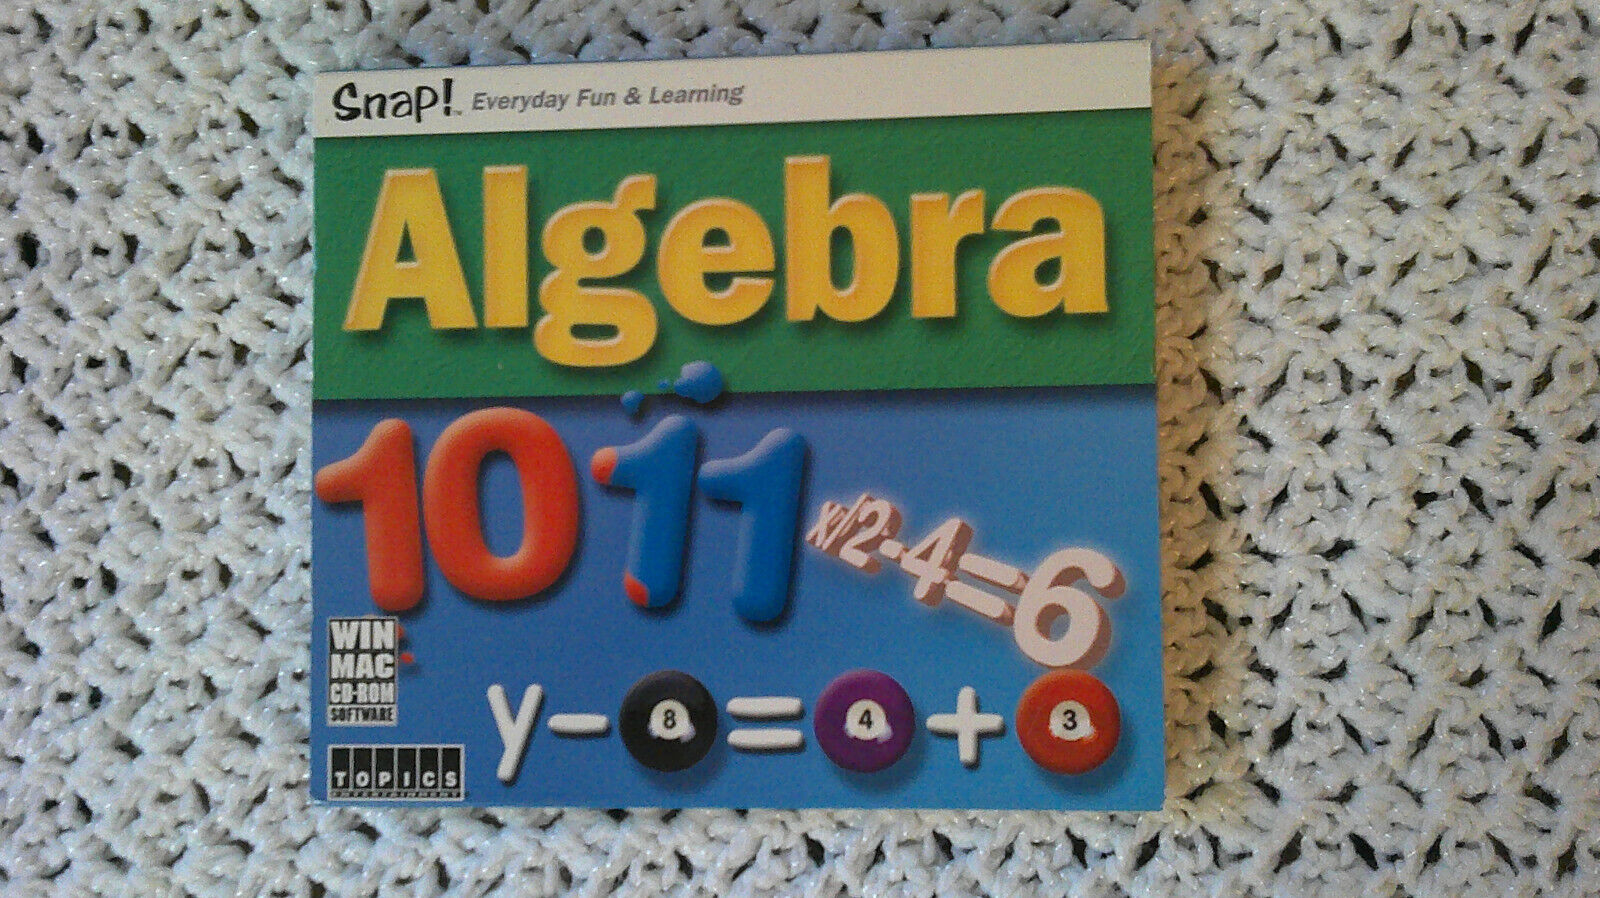 Snap Algebra CD-Rom ages 11-15. Full-color lessons & challenges c2003